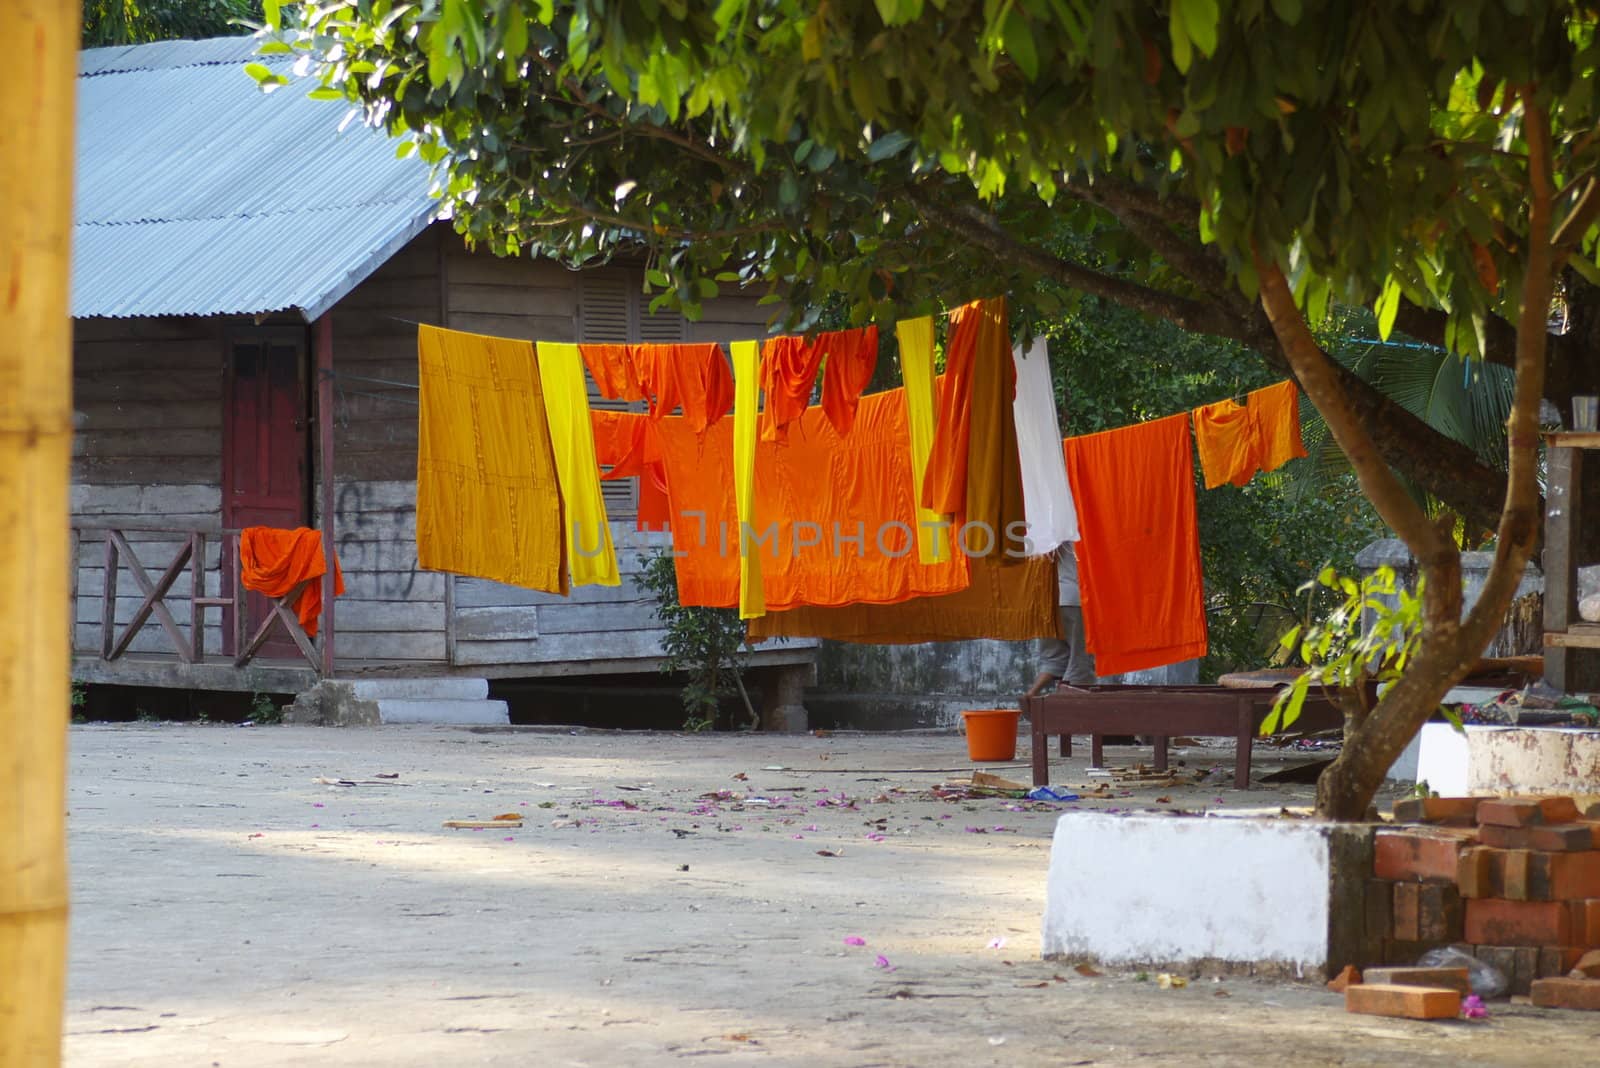 Buddhist monk robes drying on a line